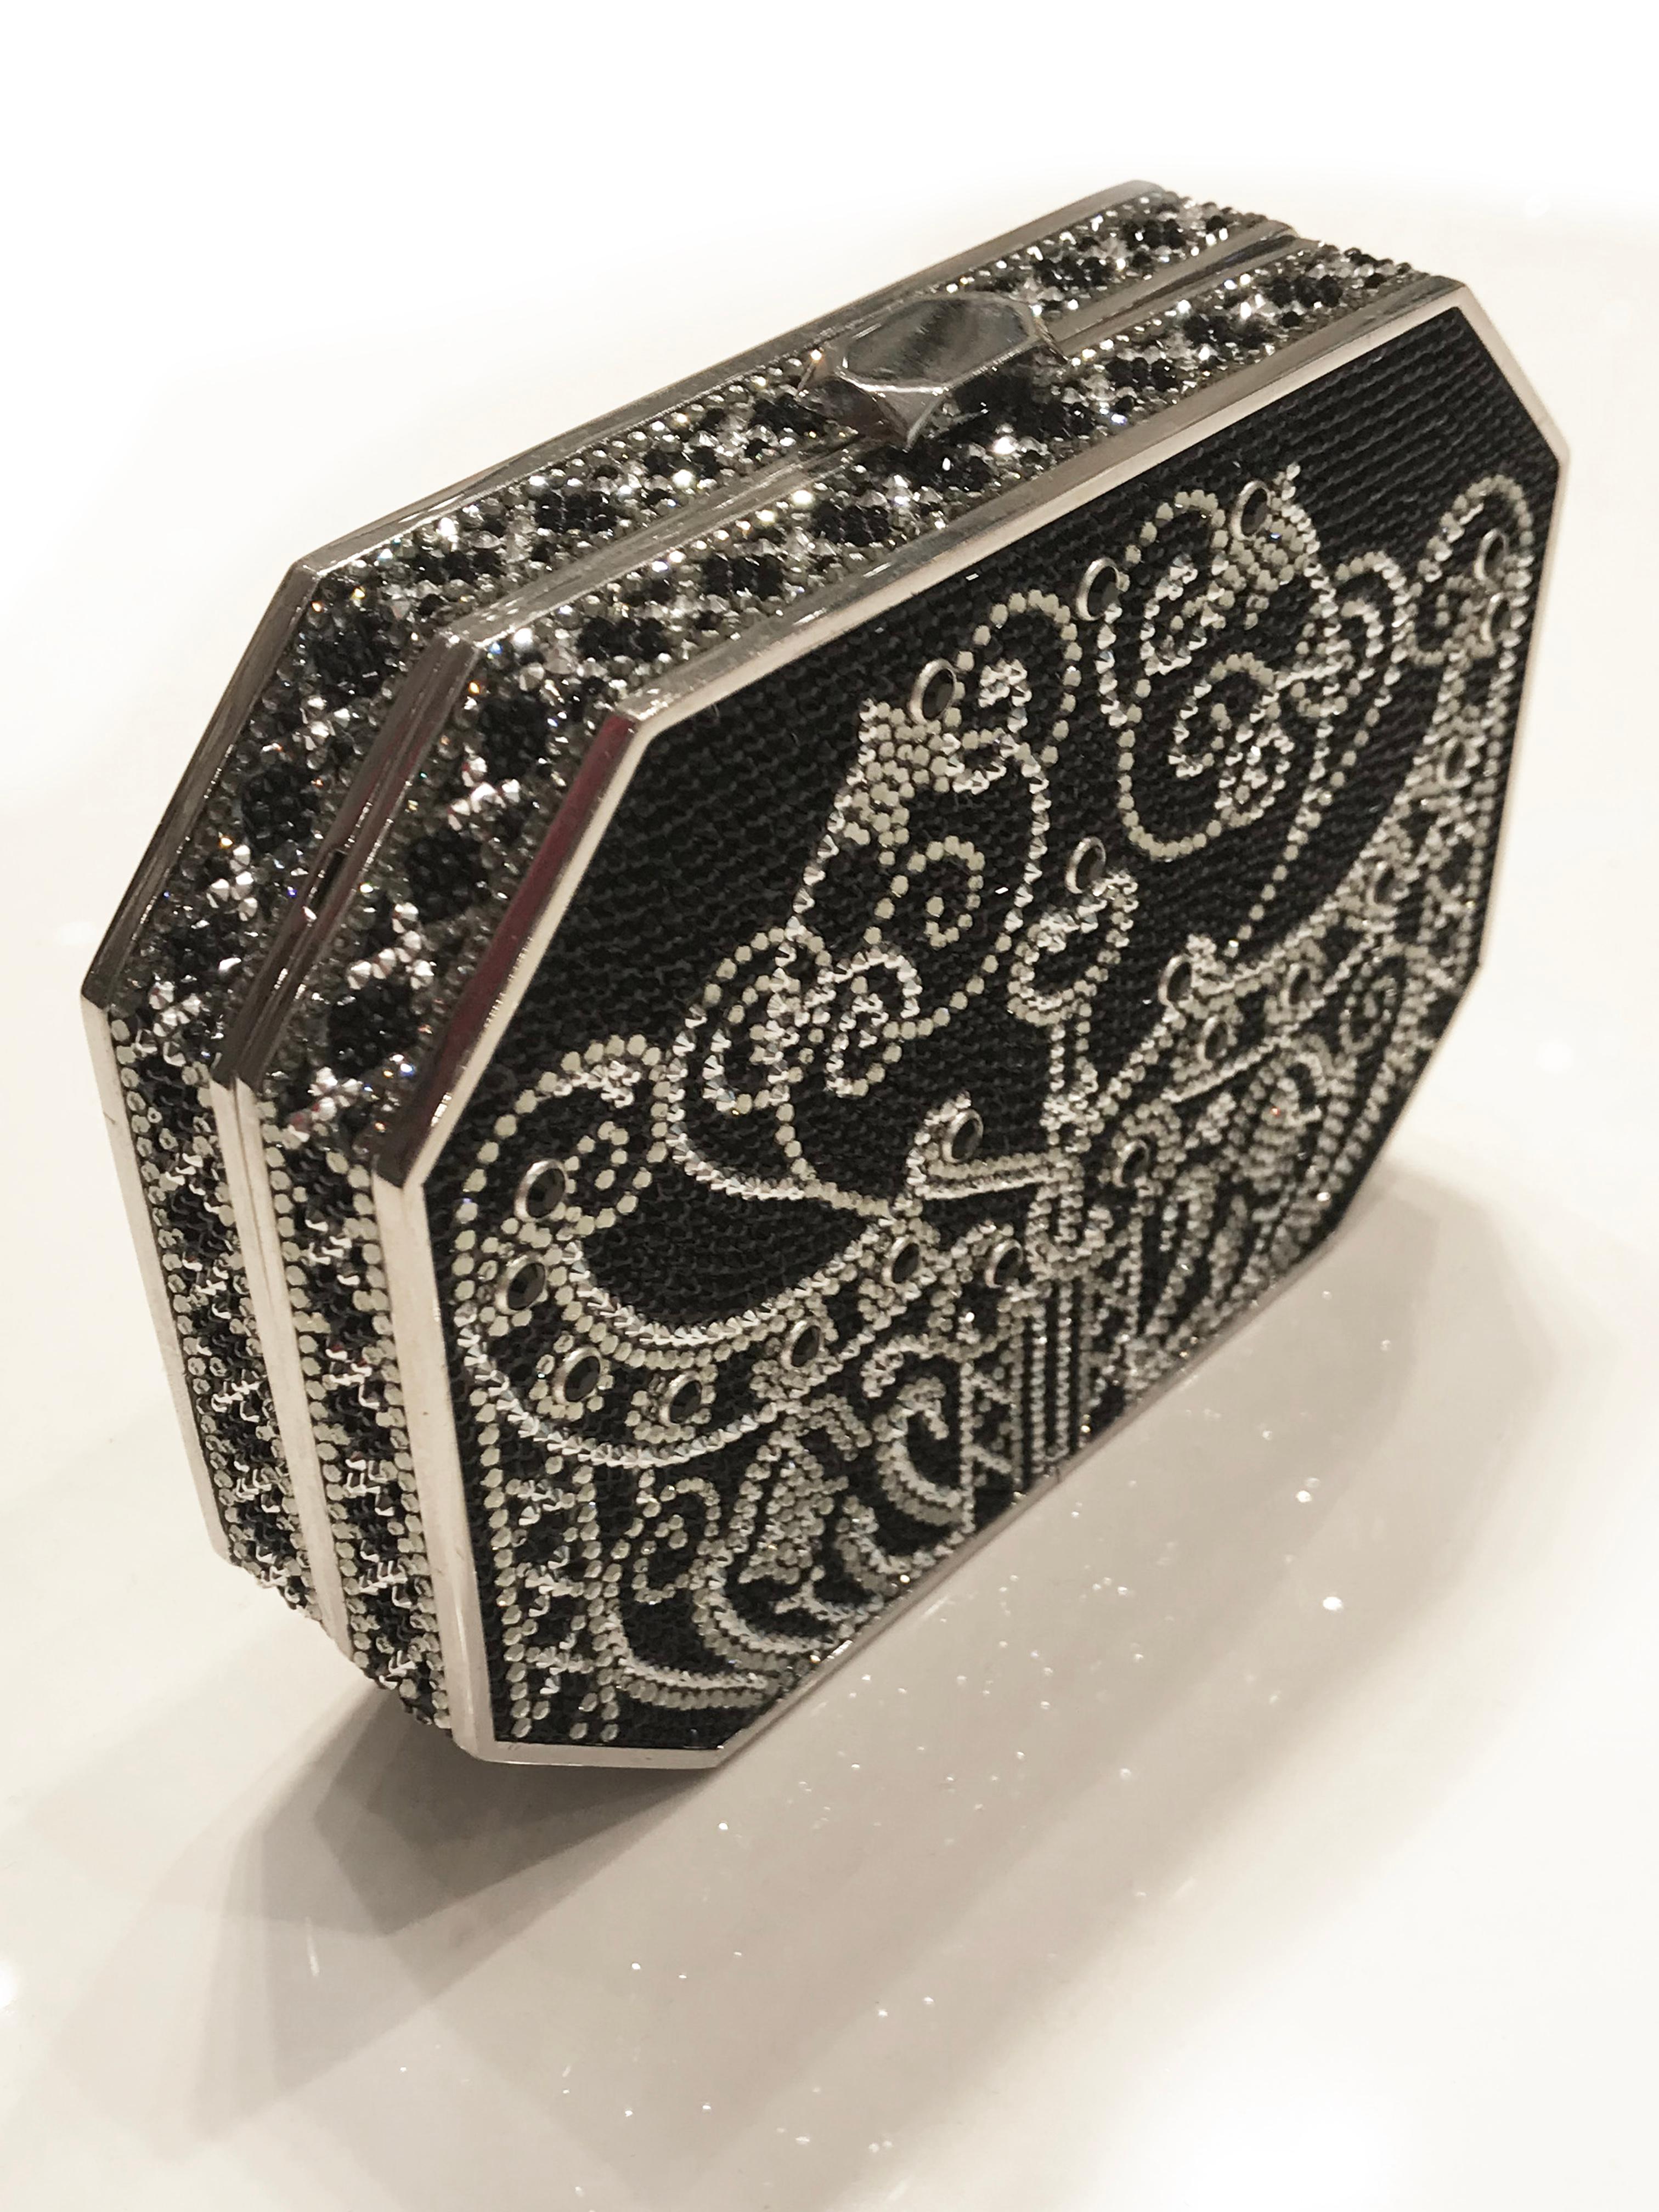 Indian fashion designer Suneet Varma for Judith Leiber Crystal encrusted hard shell convertible clutch evening bag. This collection of bags which opened at the Fall 2011 Vendome Luxury fair in Paris, is inspired by his travel to Russia and visit to